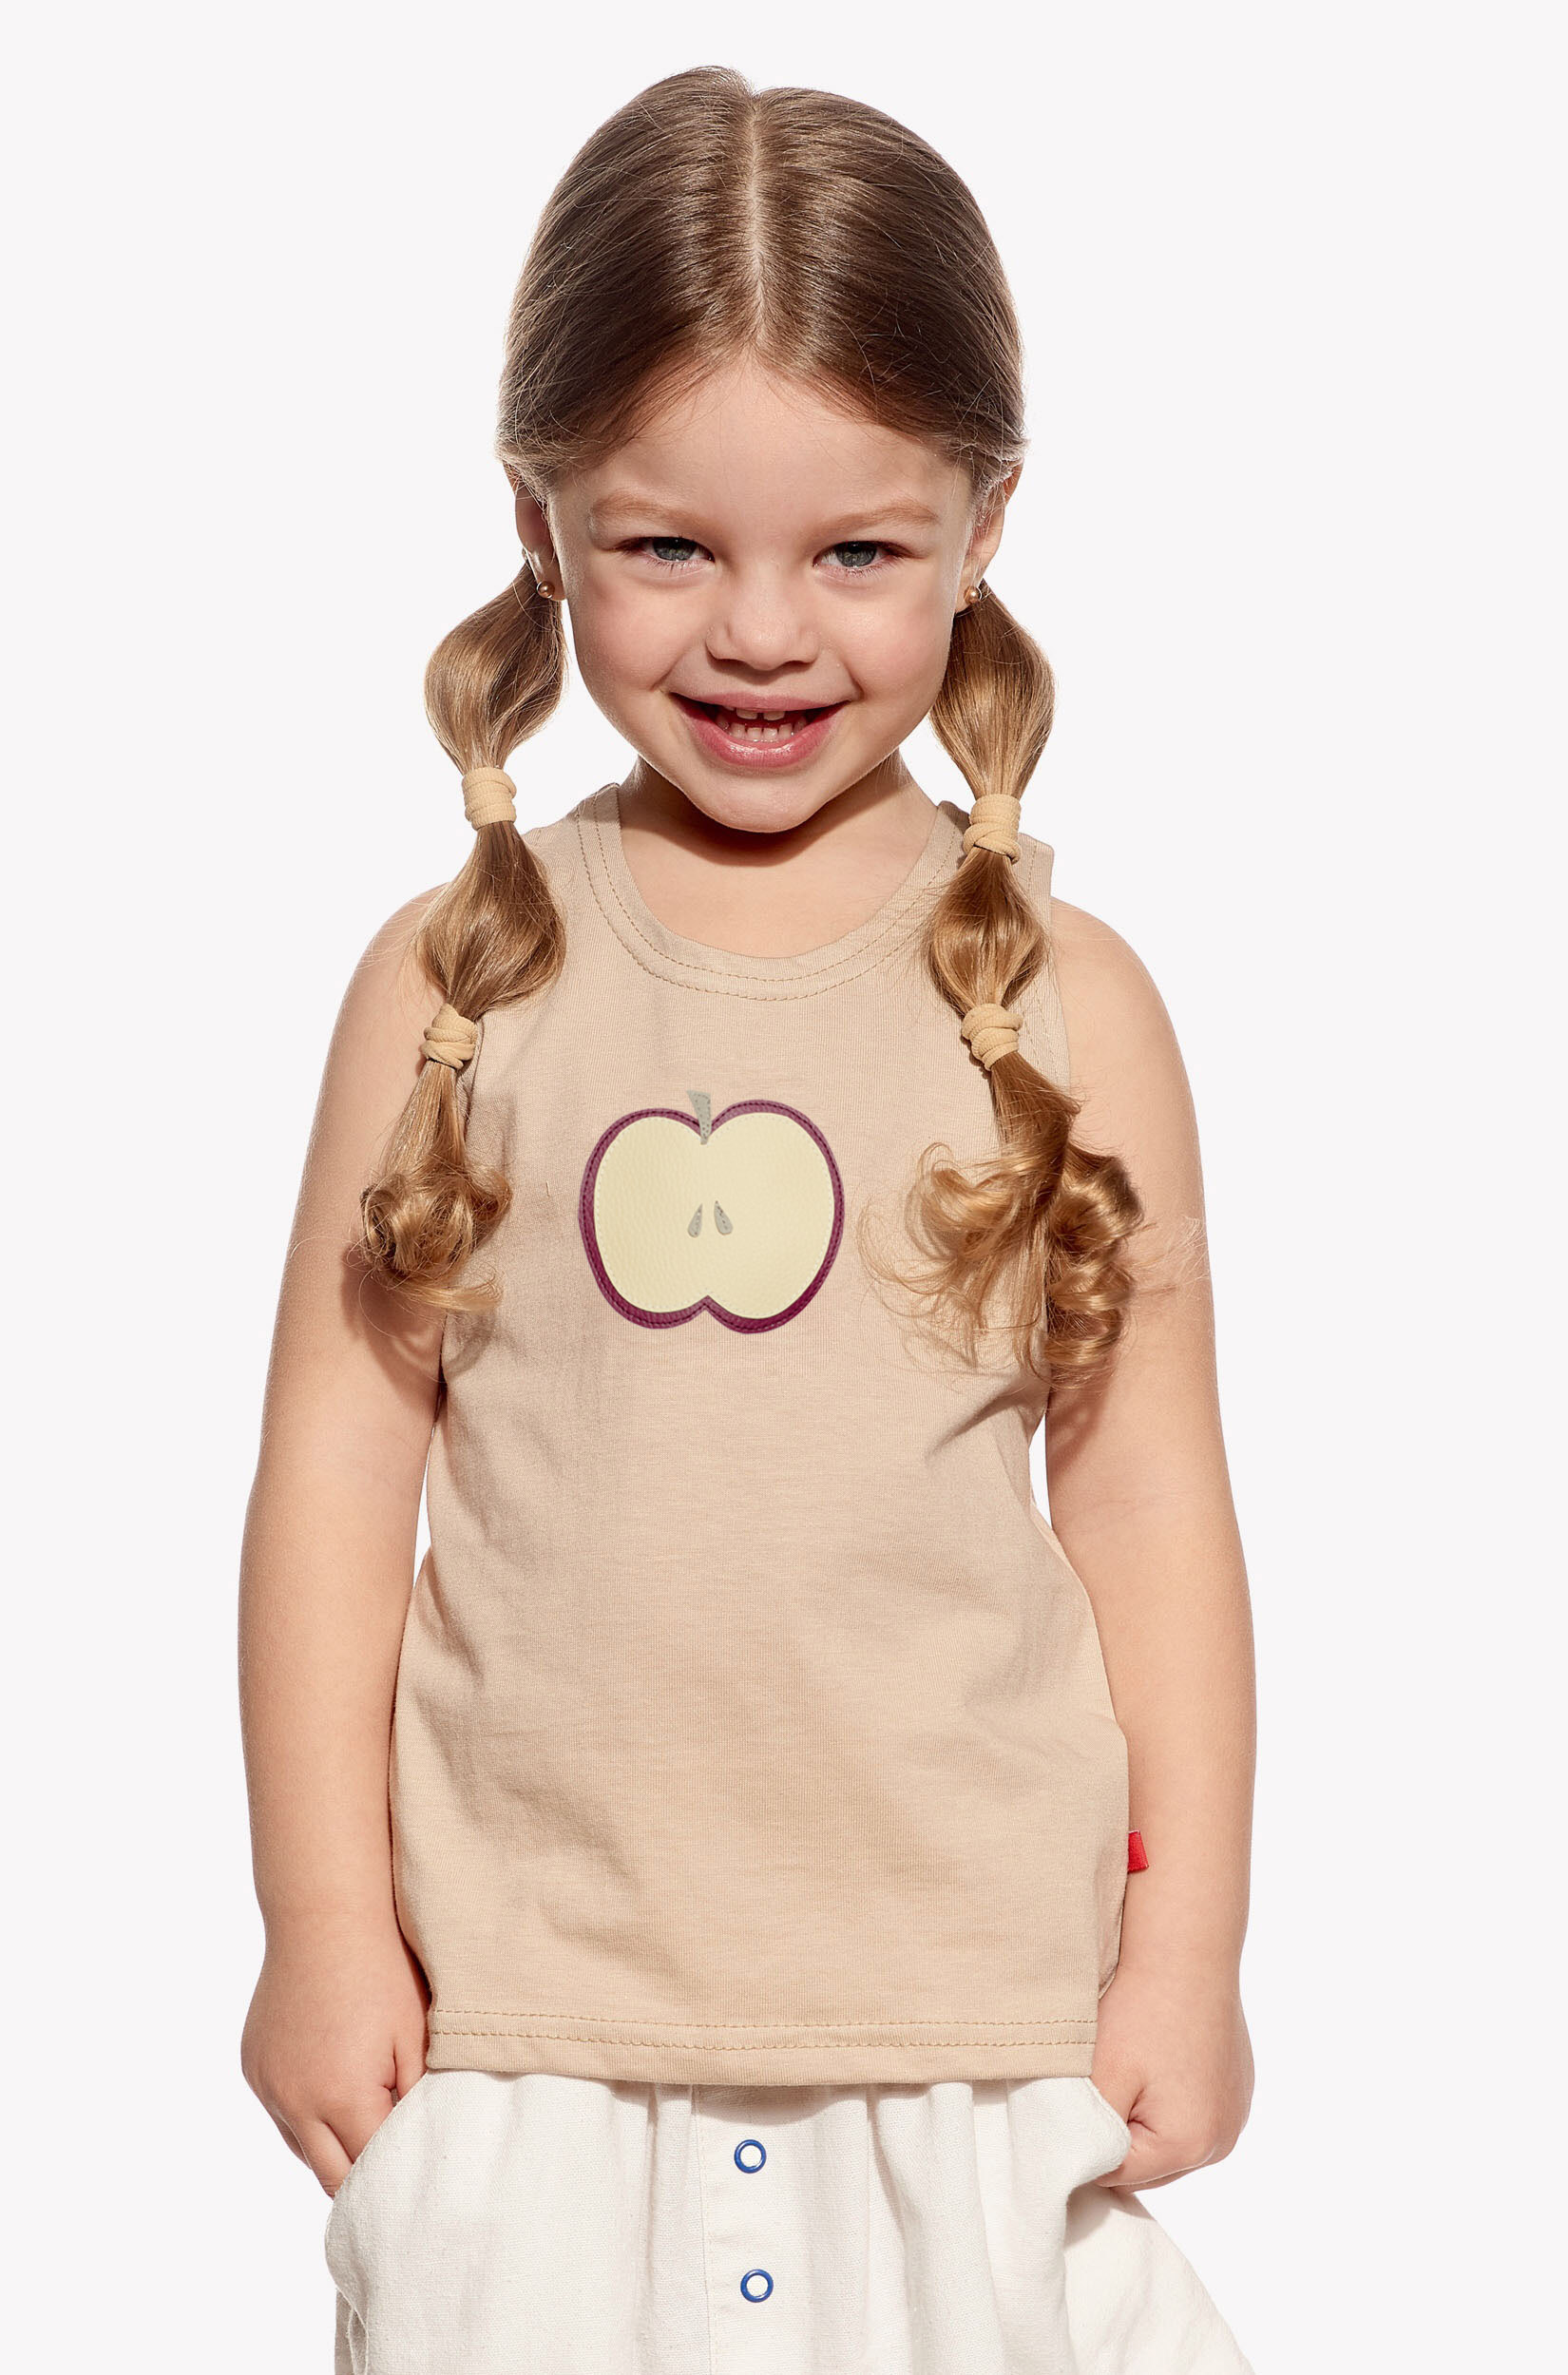 Singlet with apple